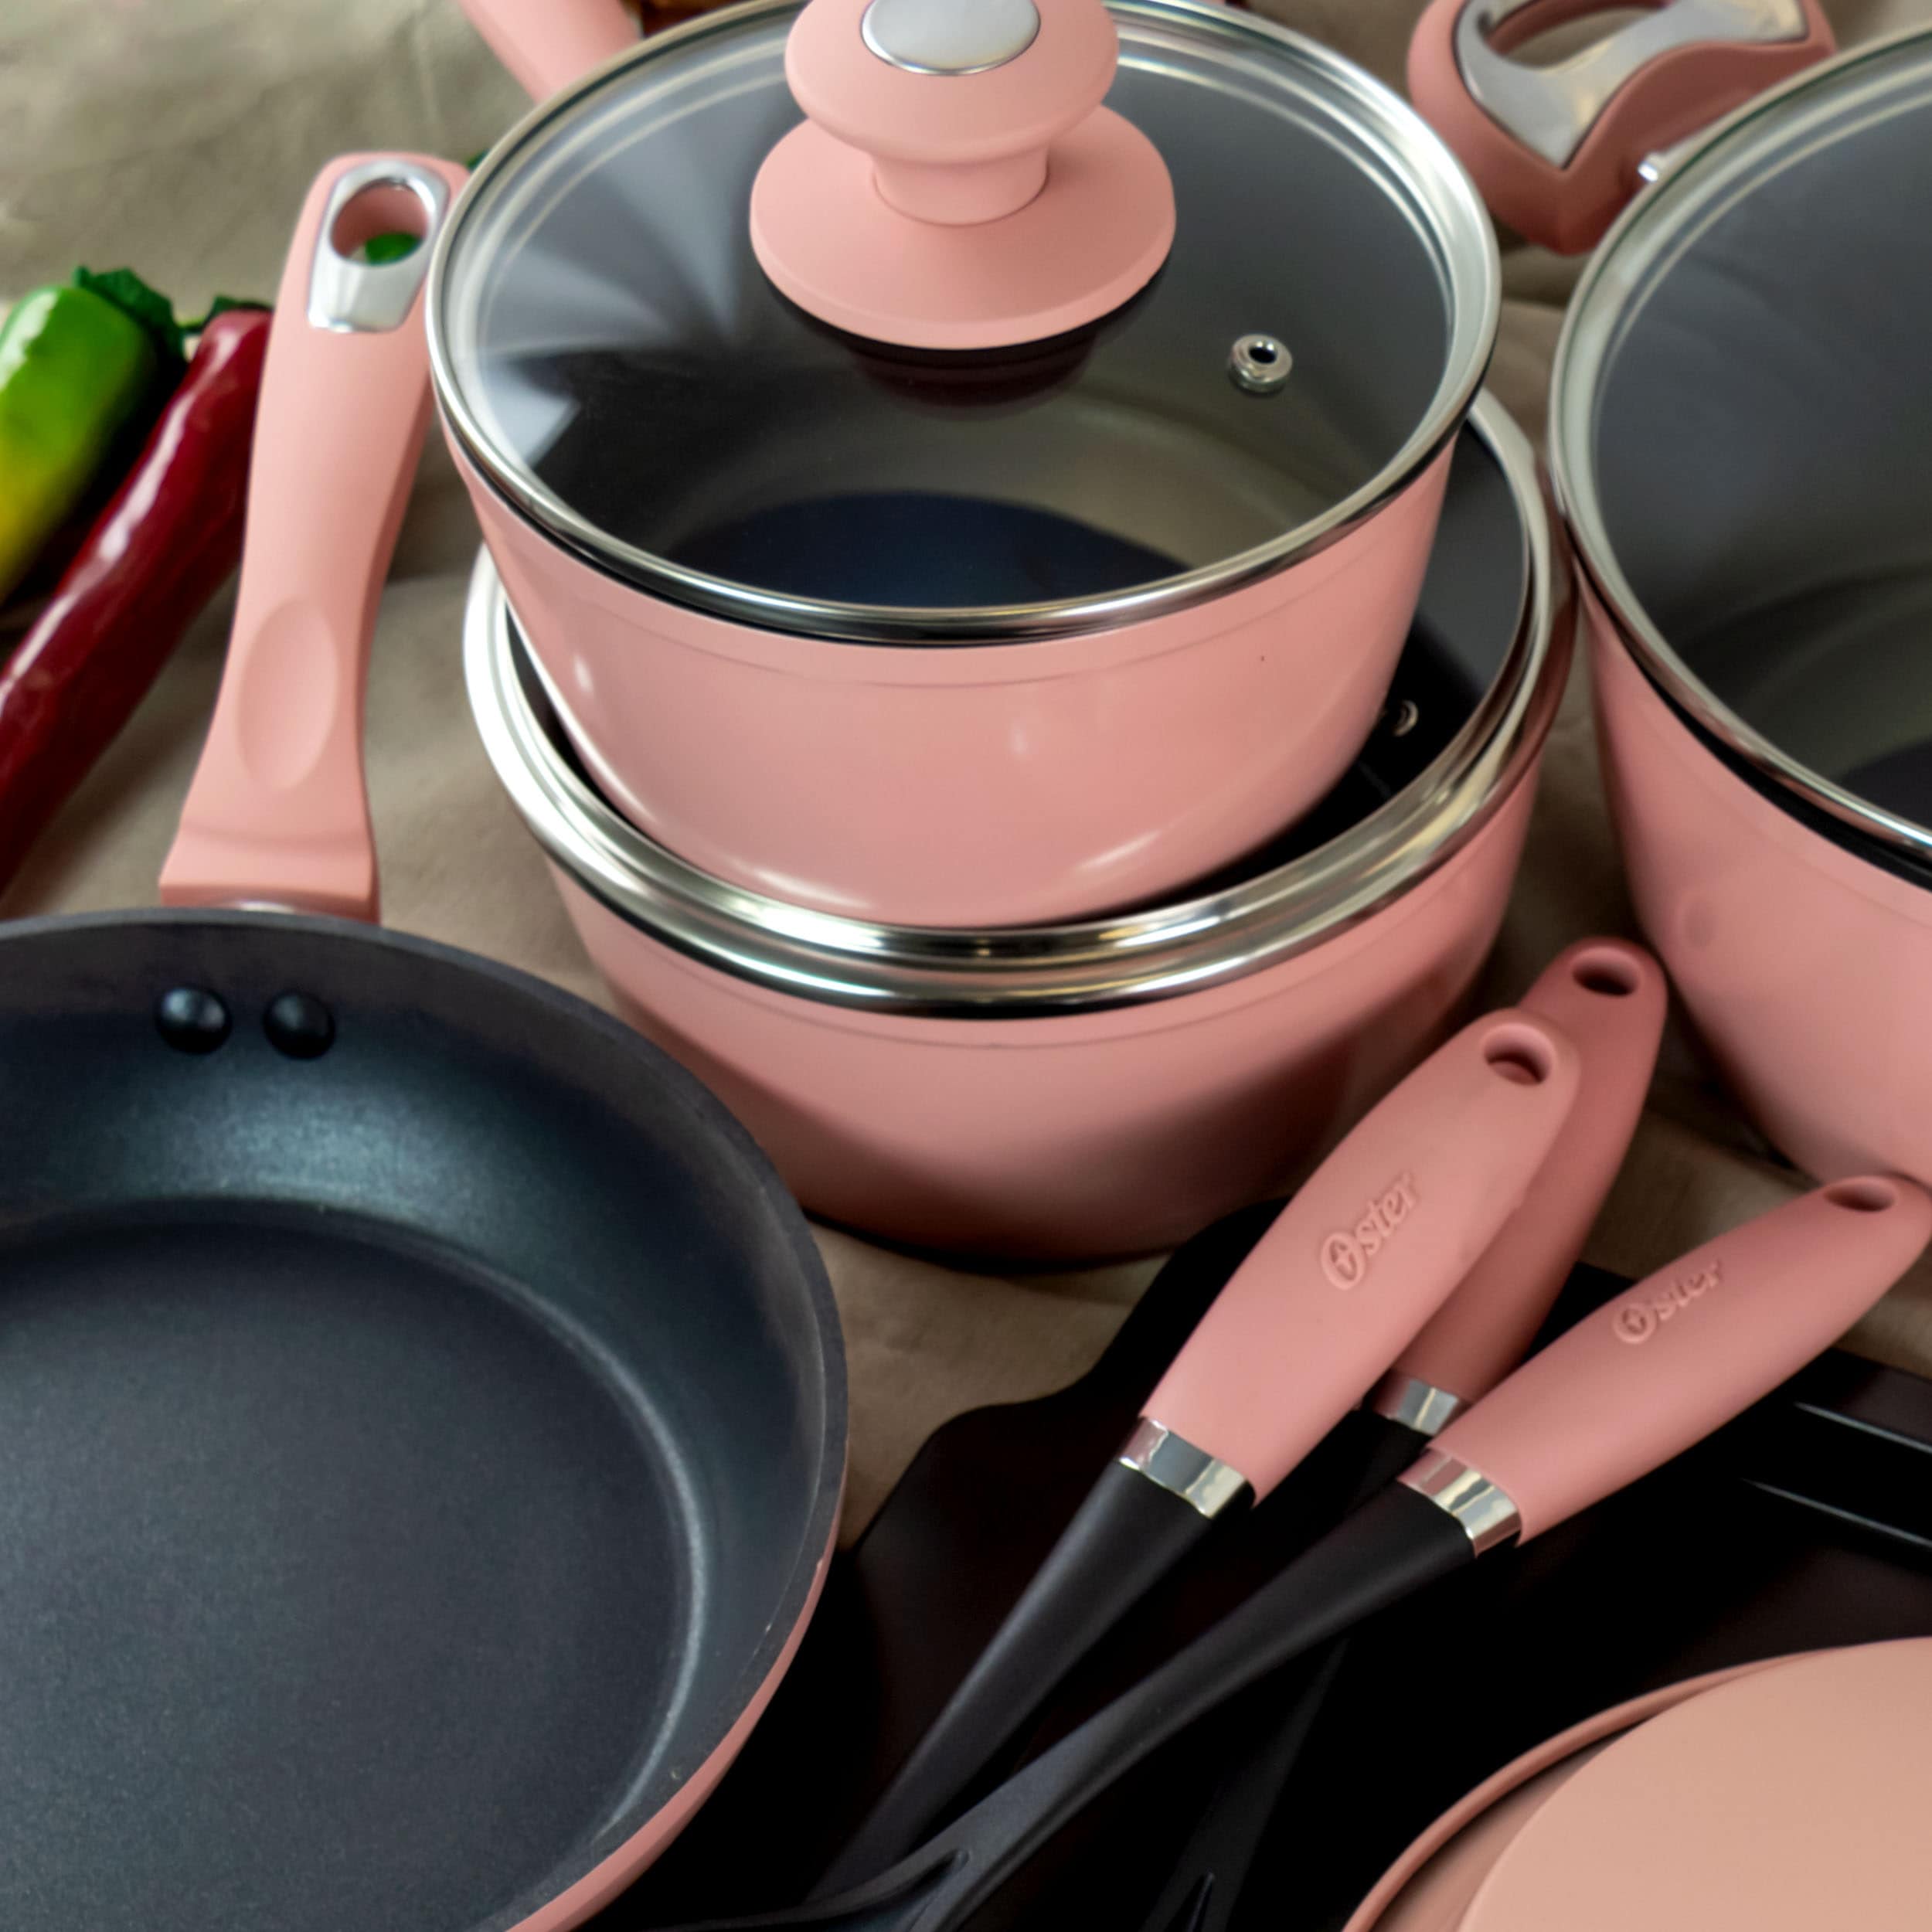 12 Pc Pots and Pans Set Nonstick Kitchen Cookware Sets, Dutch Oven Set,  with Lids, Induction Cookware Dishwasher Safe - Bed Bath & Beyond - 39589678